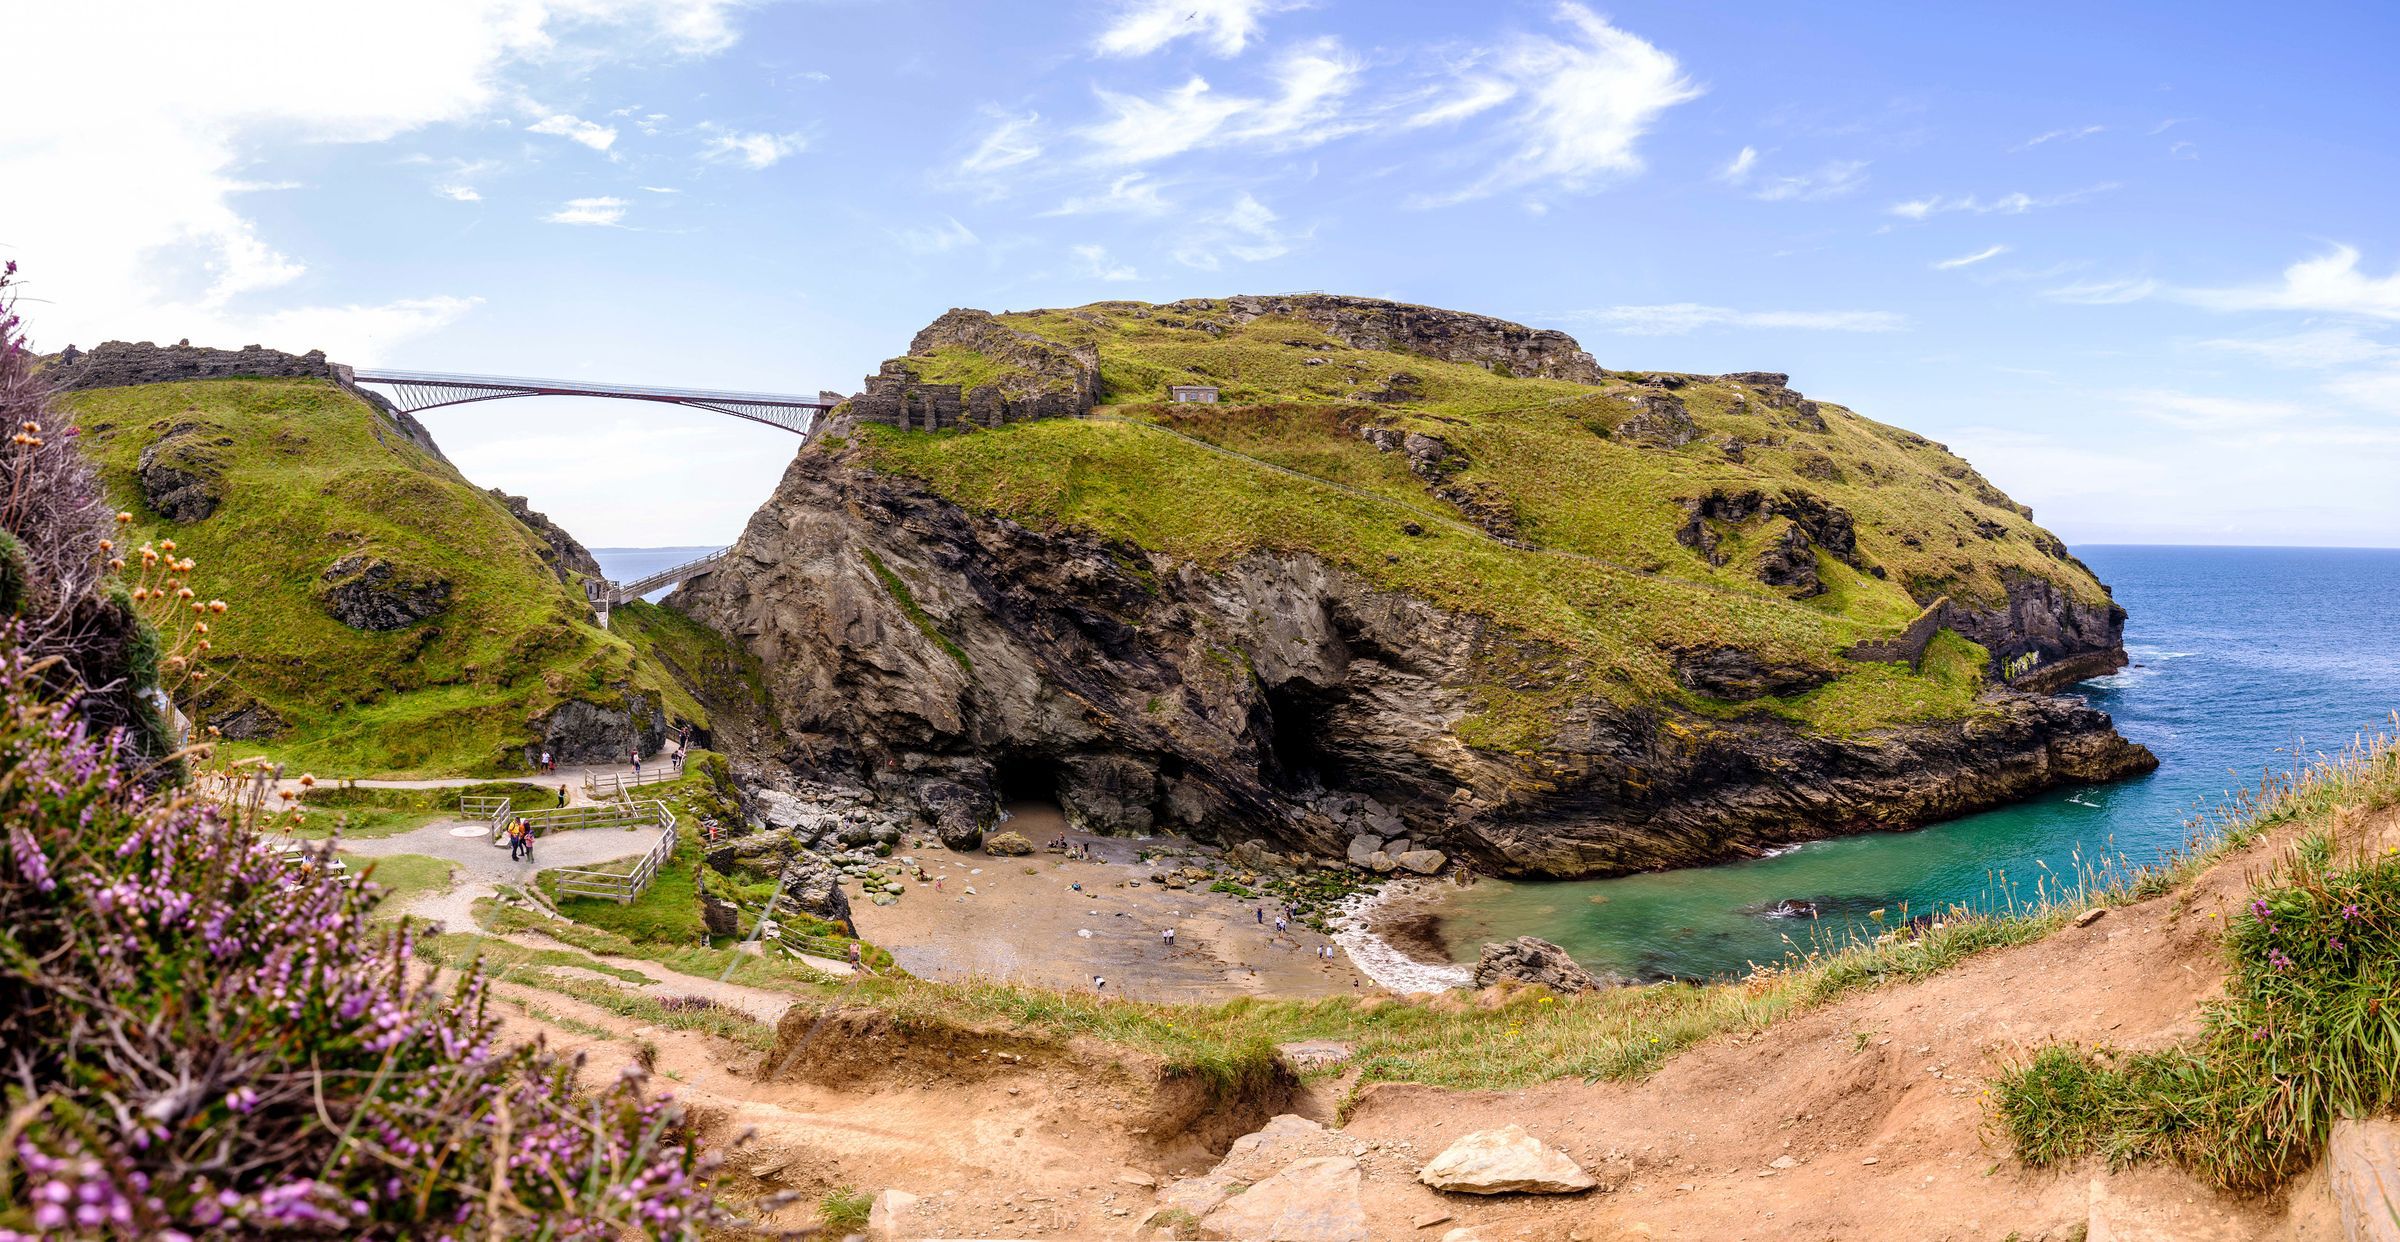  Tintagel  Eng HEritage Motoring Holidays and Scenic 